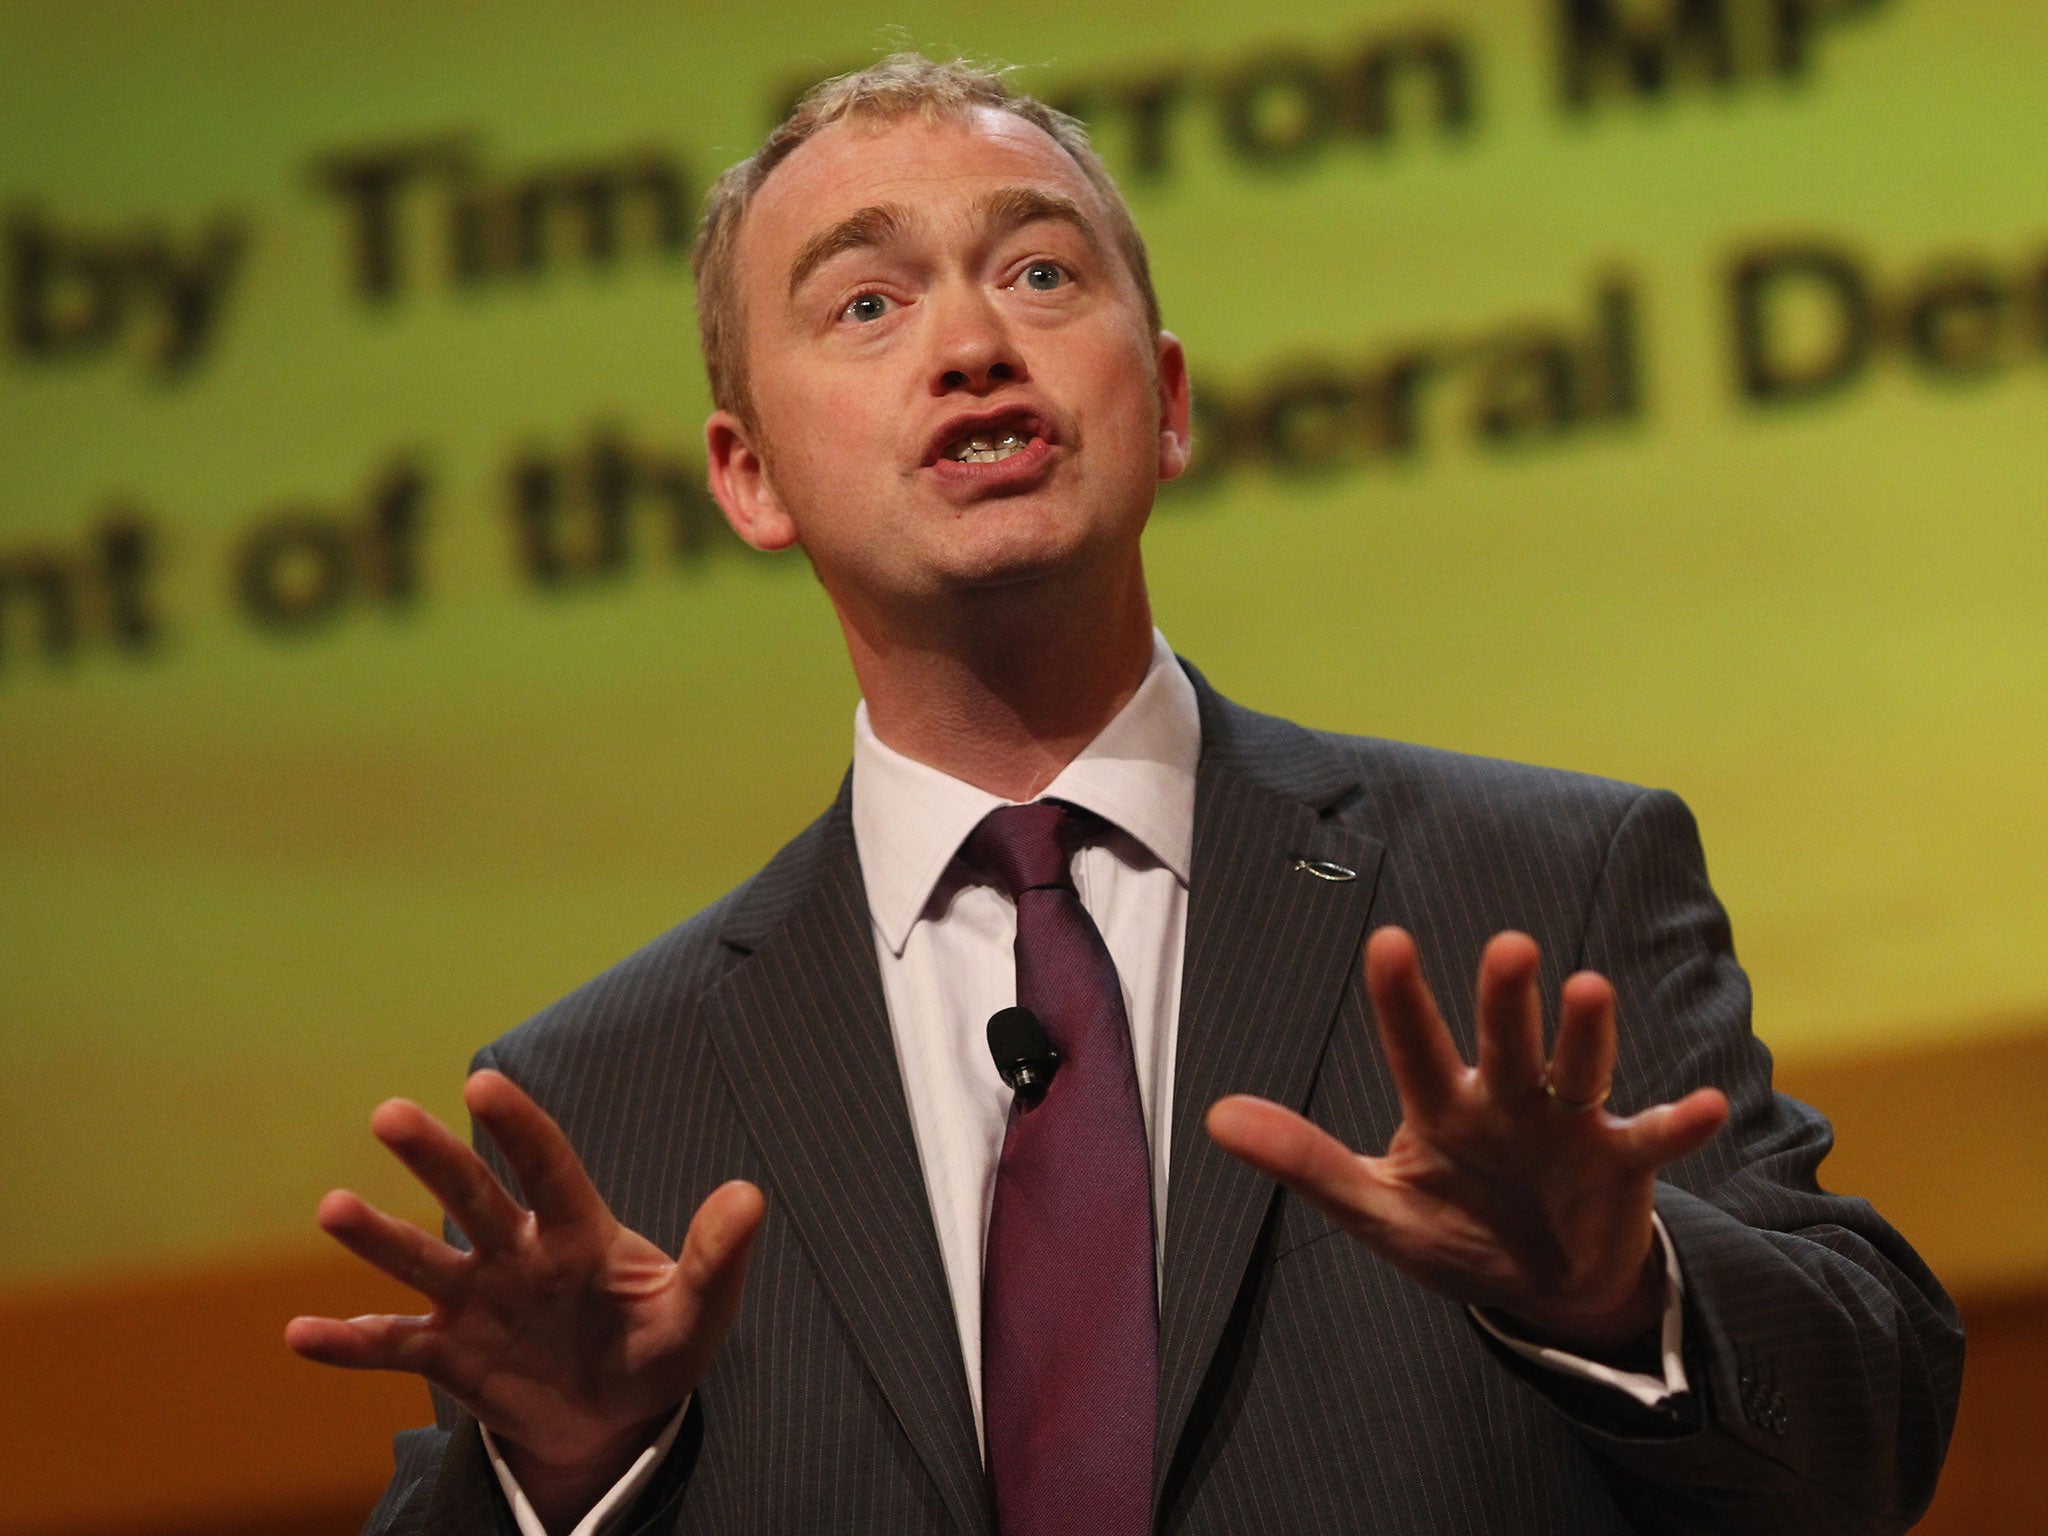 ‘We ended in a situation where people did not know what we stood for,’ Tim Farron says of his party’s time in the Coalition